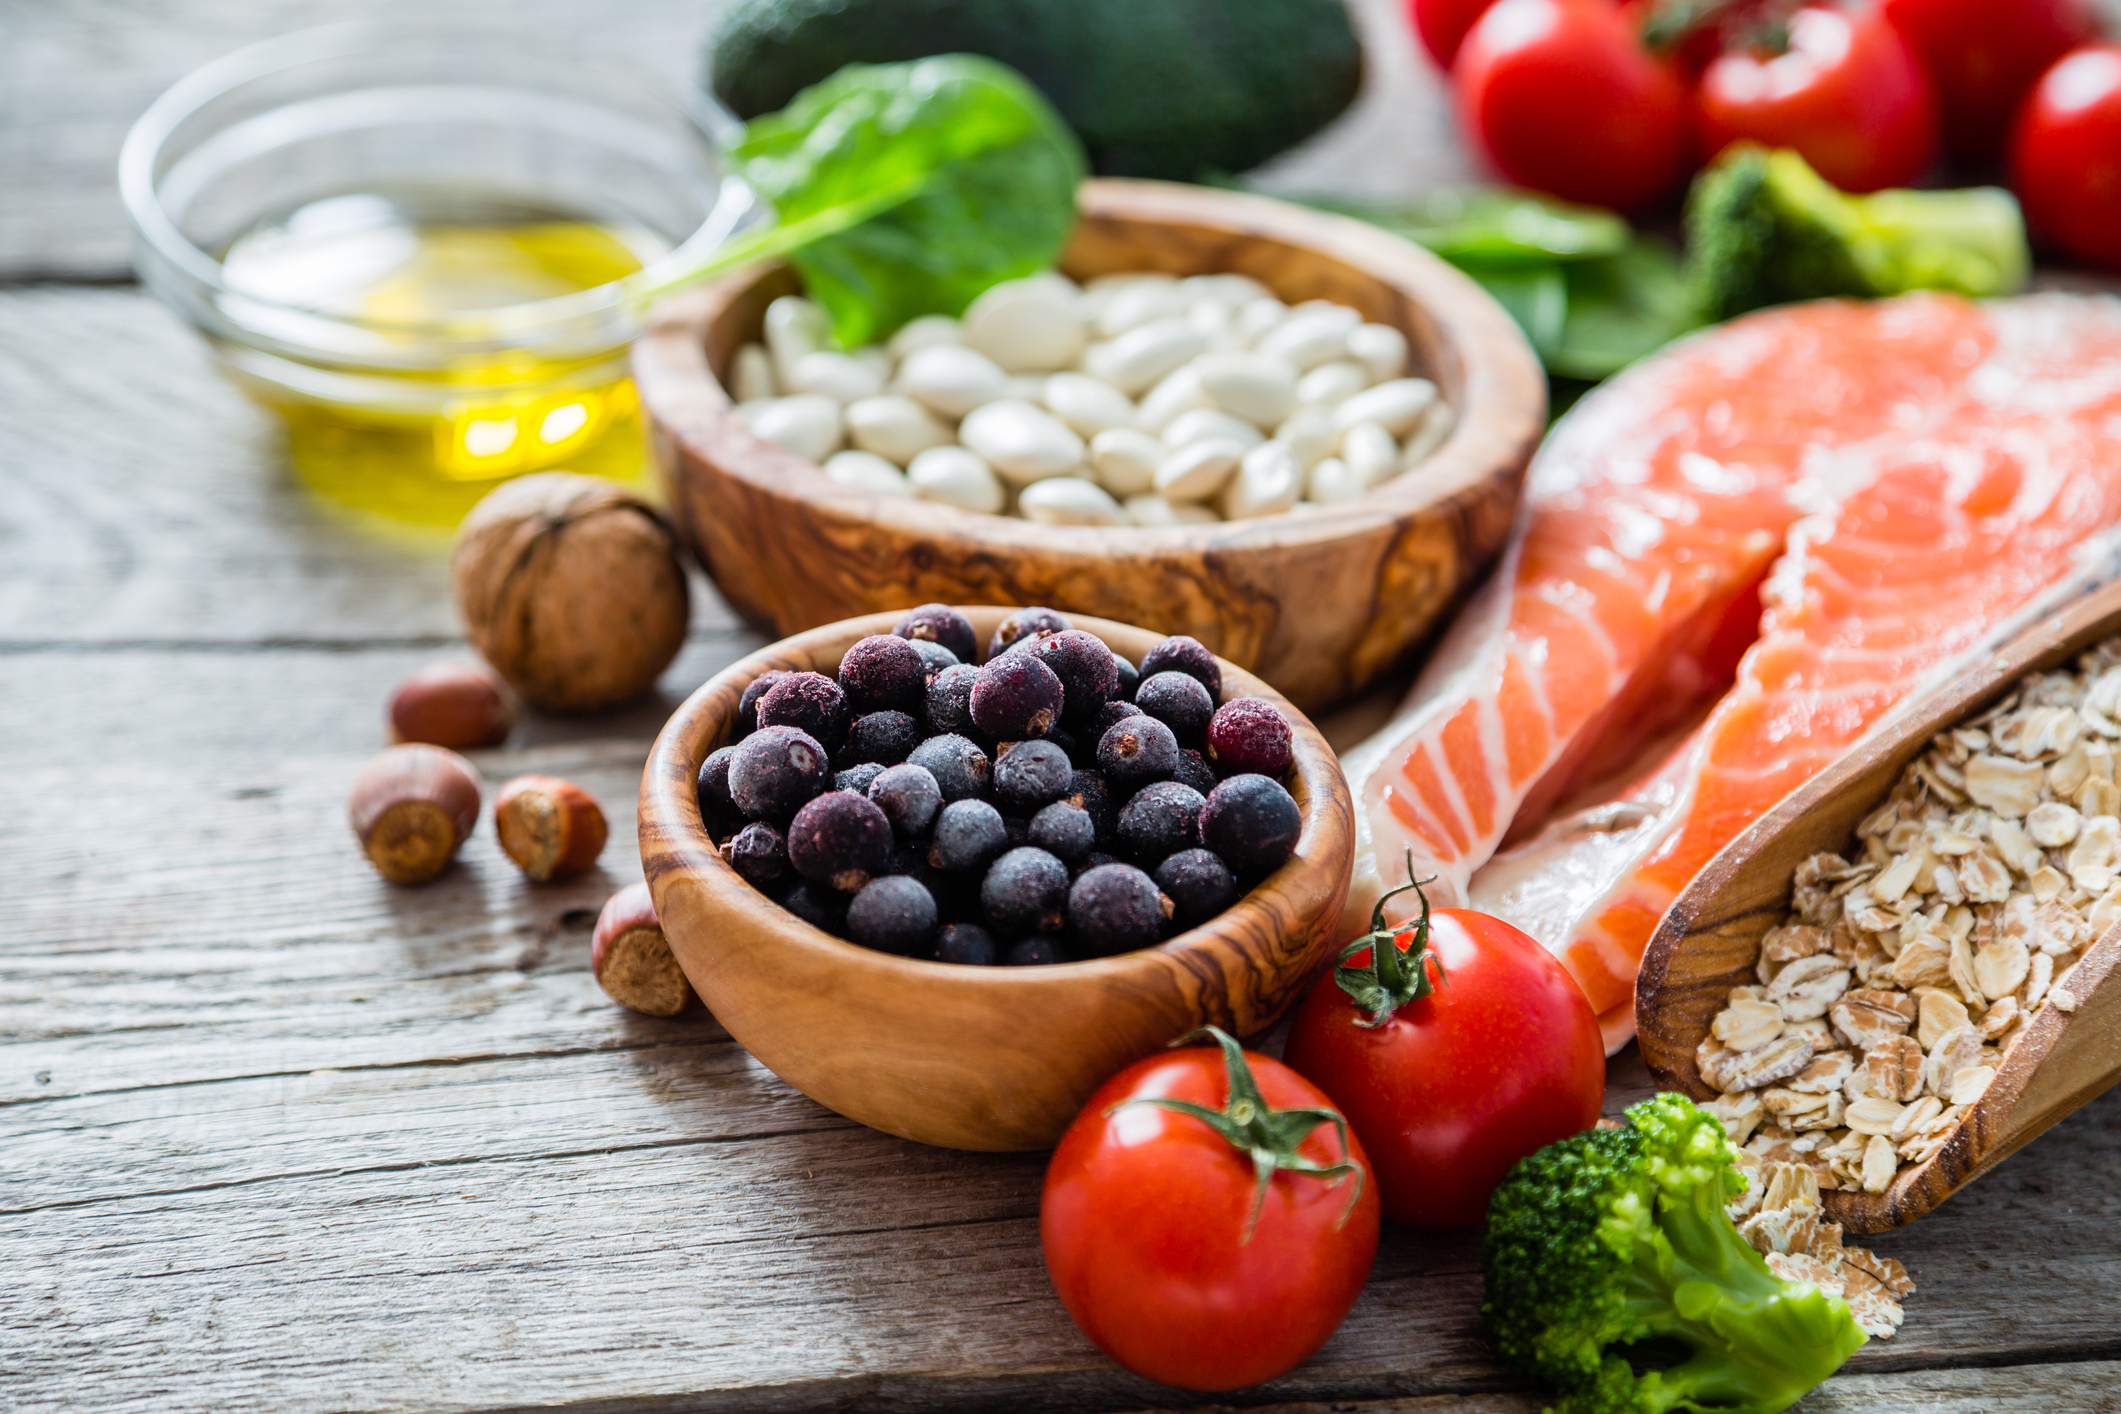 Many people believe that the Mediterranean Diet could help your heart.